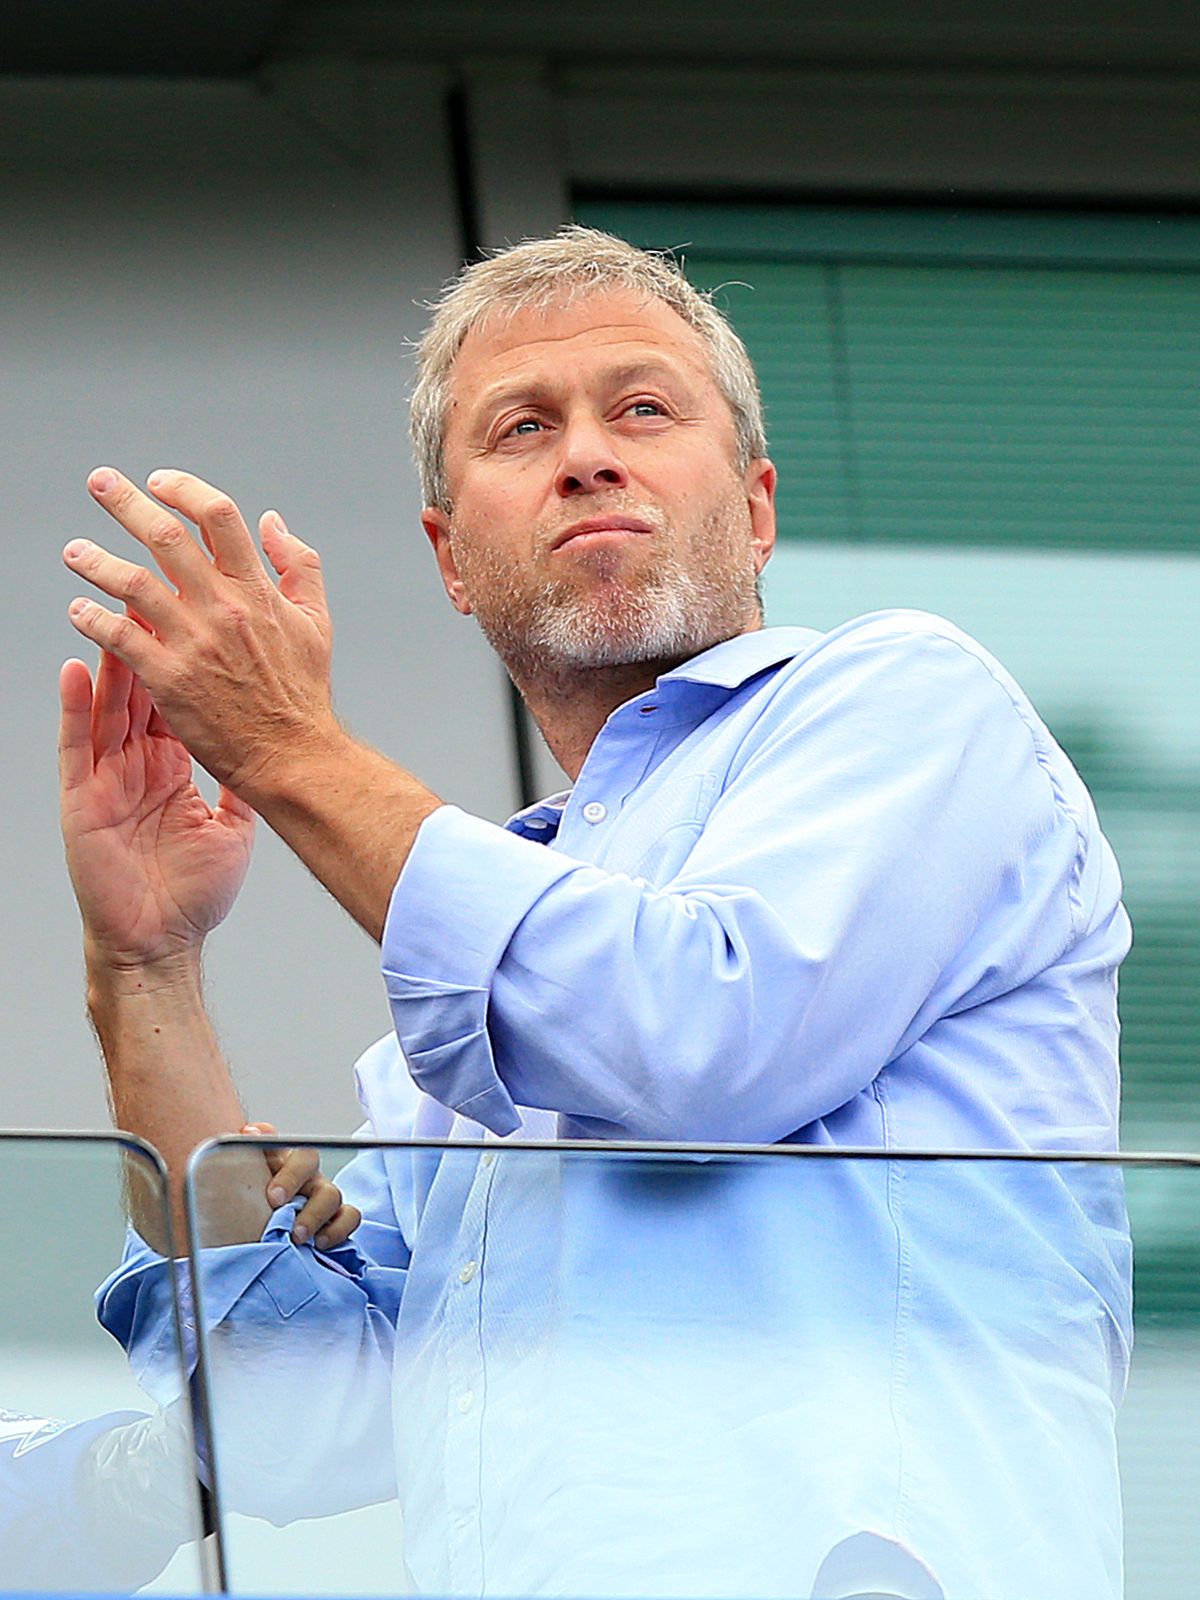 Roman Abramovich and UK Government reach resolution to push through Chelsea sale